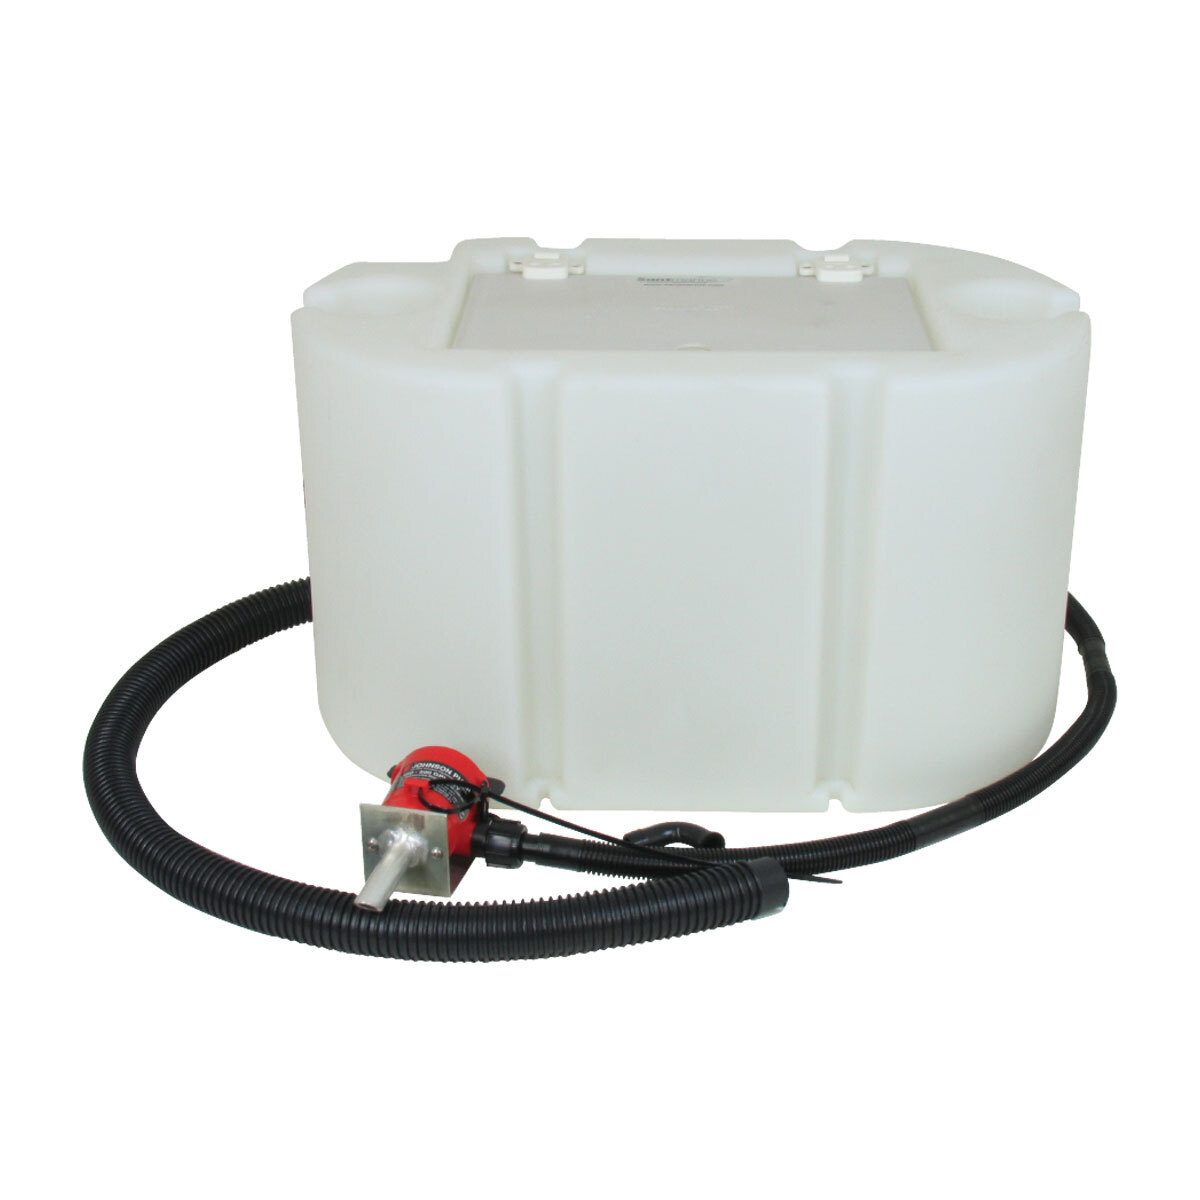 Sant Marine Live Bait Tank with Pump Hose and Fittings Boat Marine